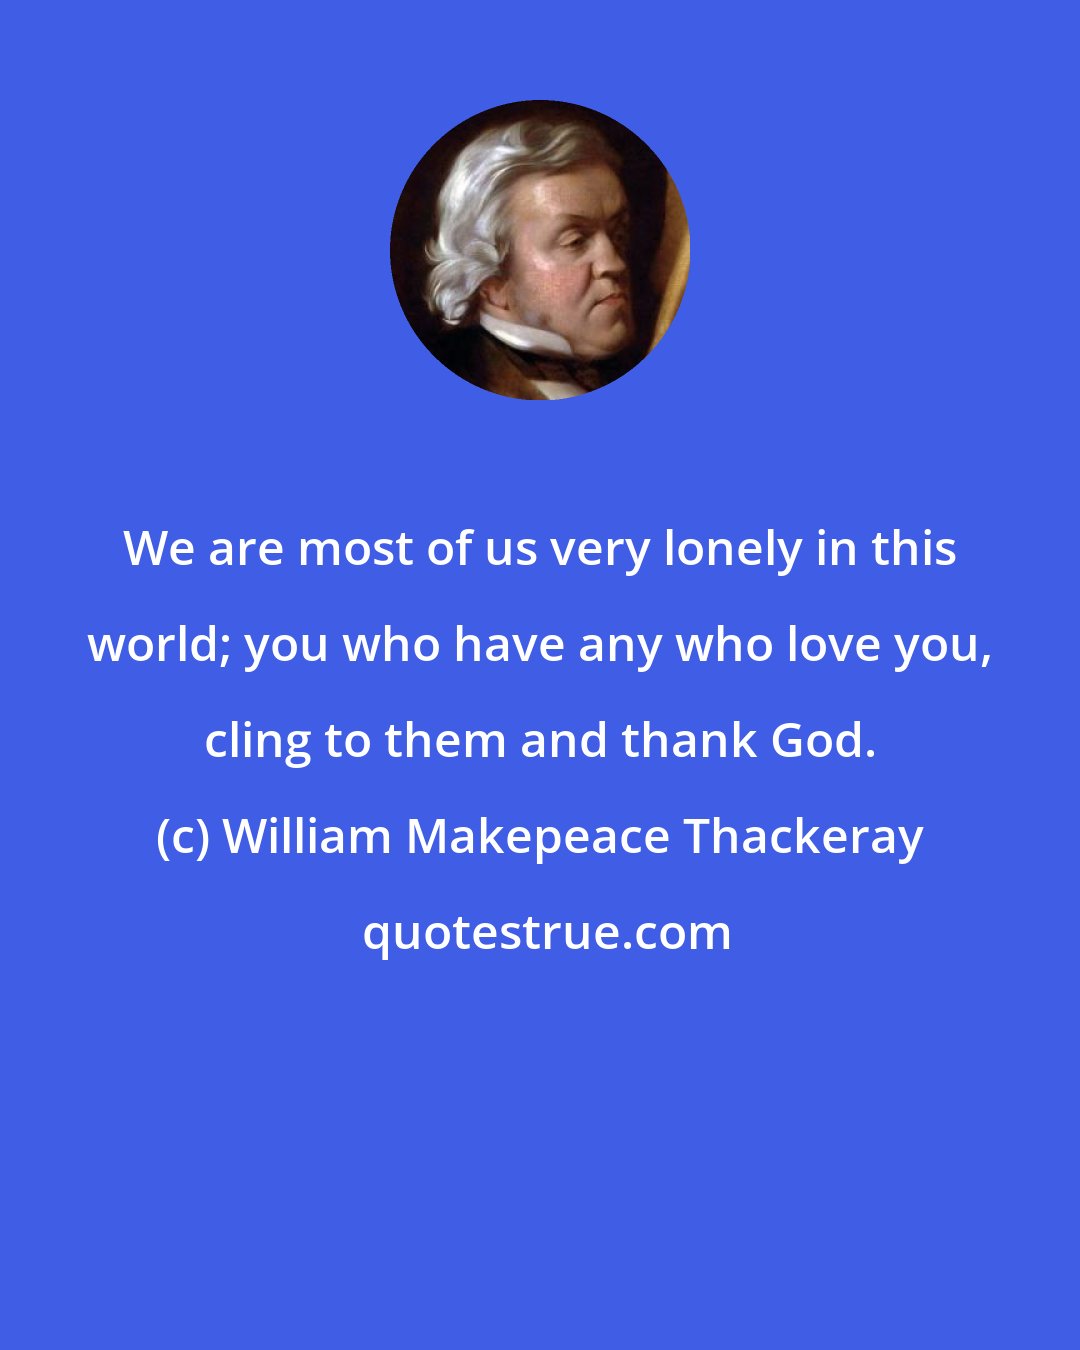 William Makepeace Thackeray: We are most of us very lonely in this world; you who have any who love you, cling to them and thank God.